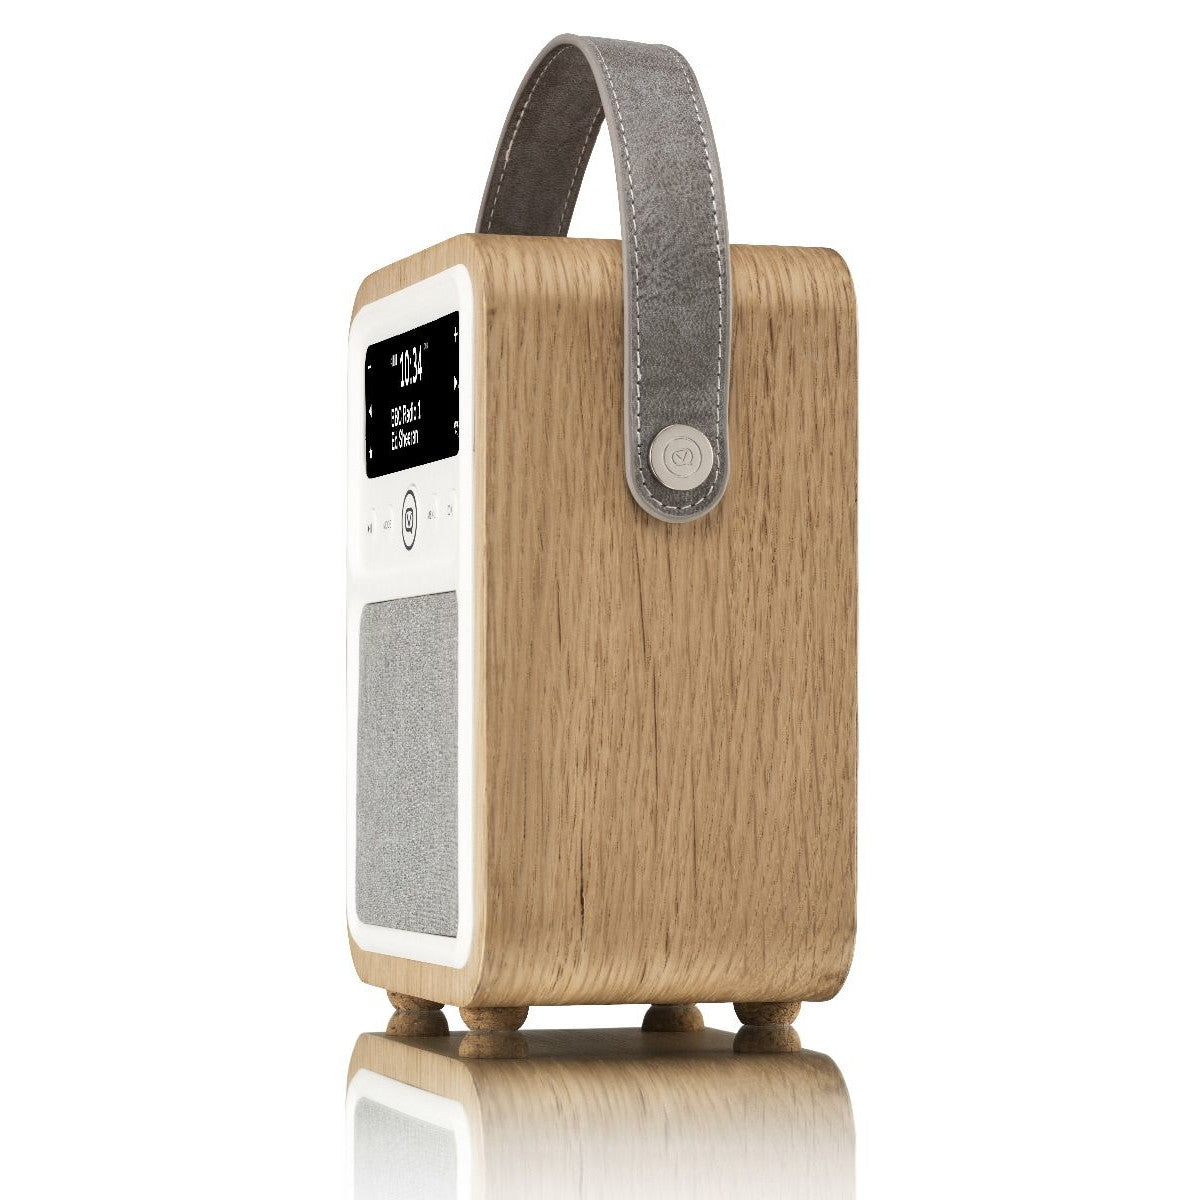 VQ Monty Portable DAB/FM Radio & Bluetooth Speaker with Rechargeable Battery Pack in Oak - 4